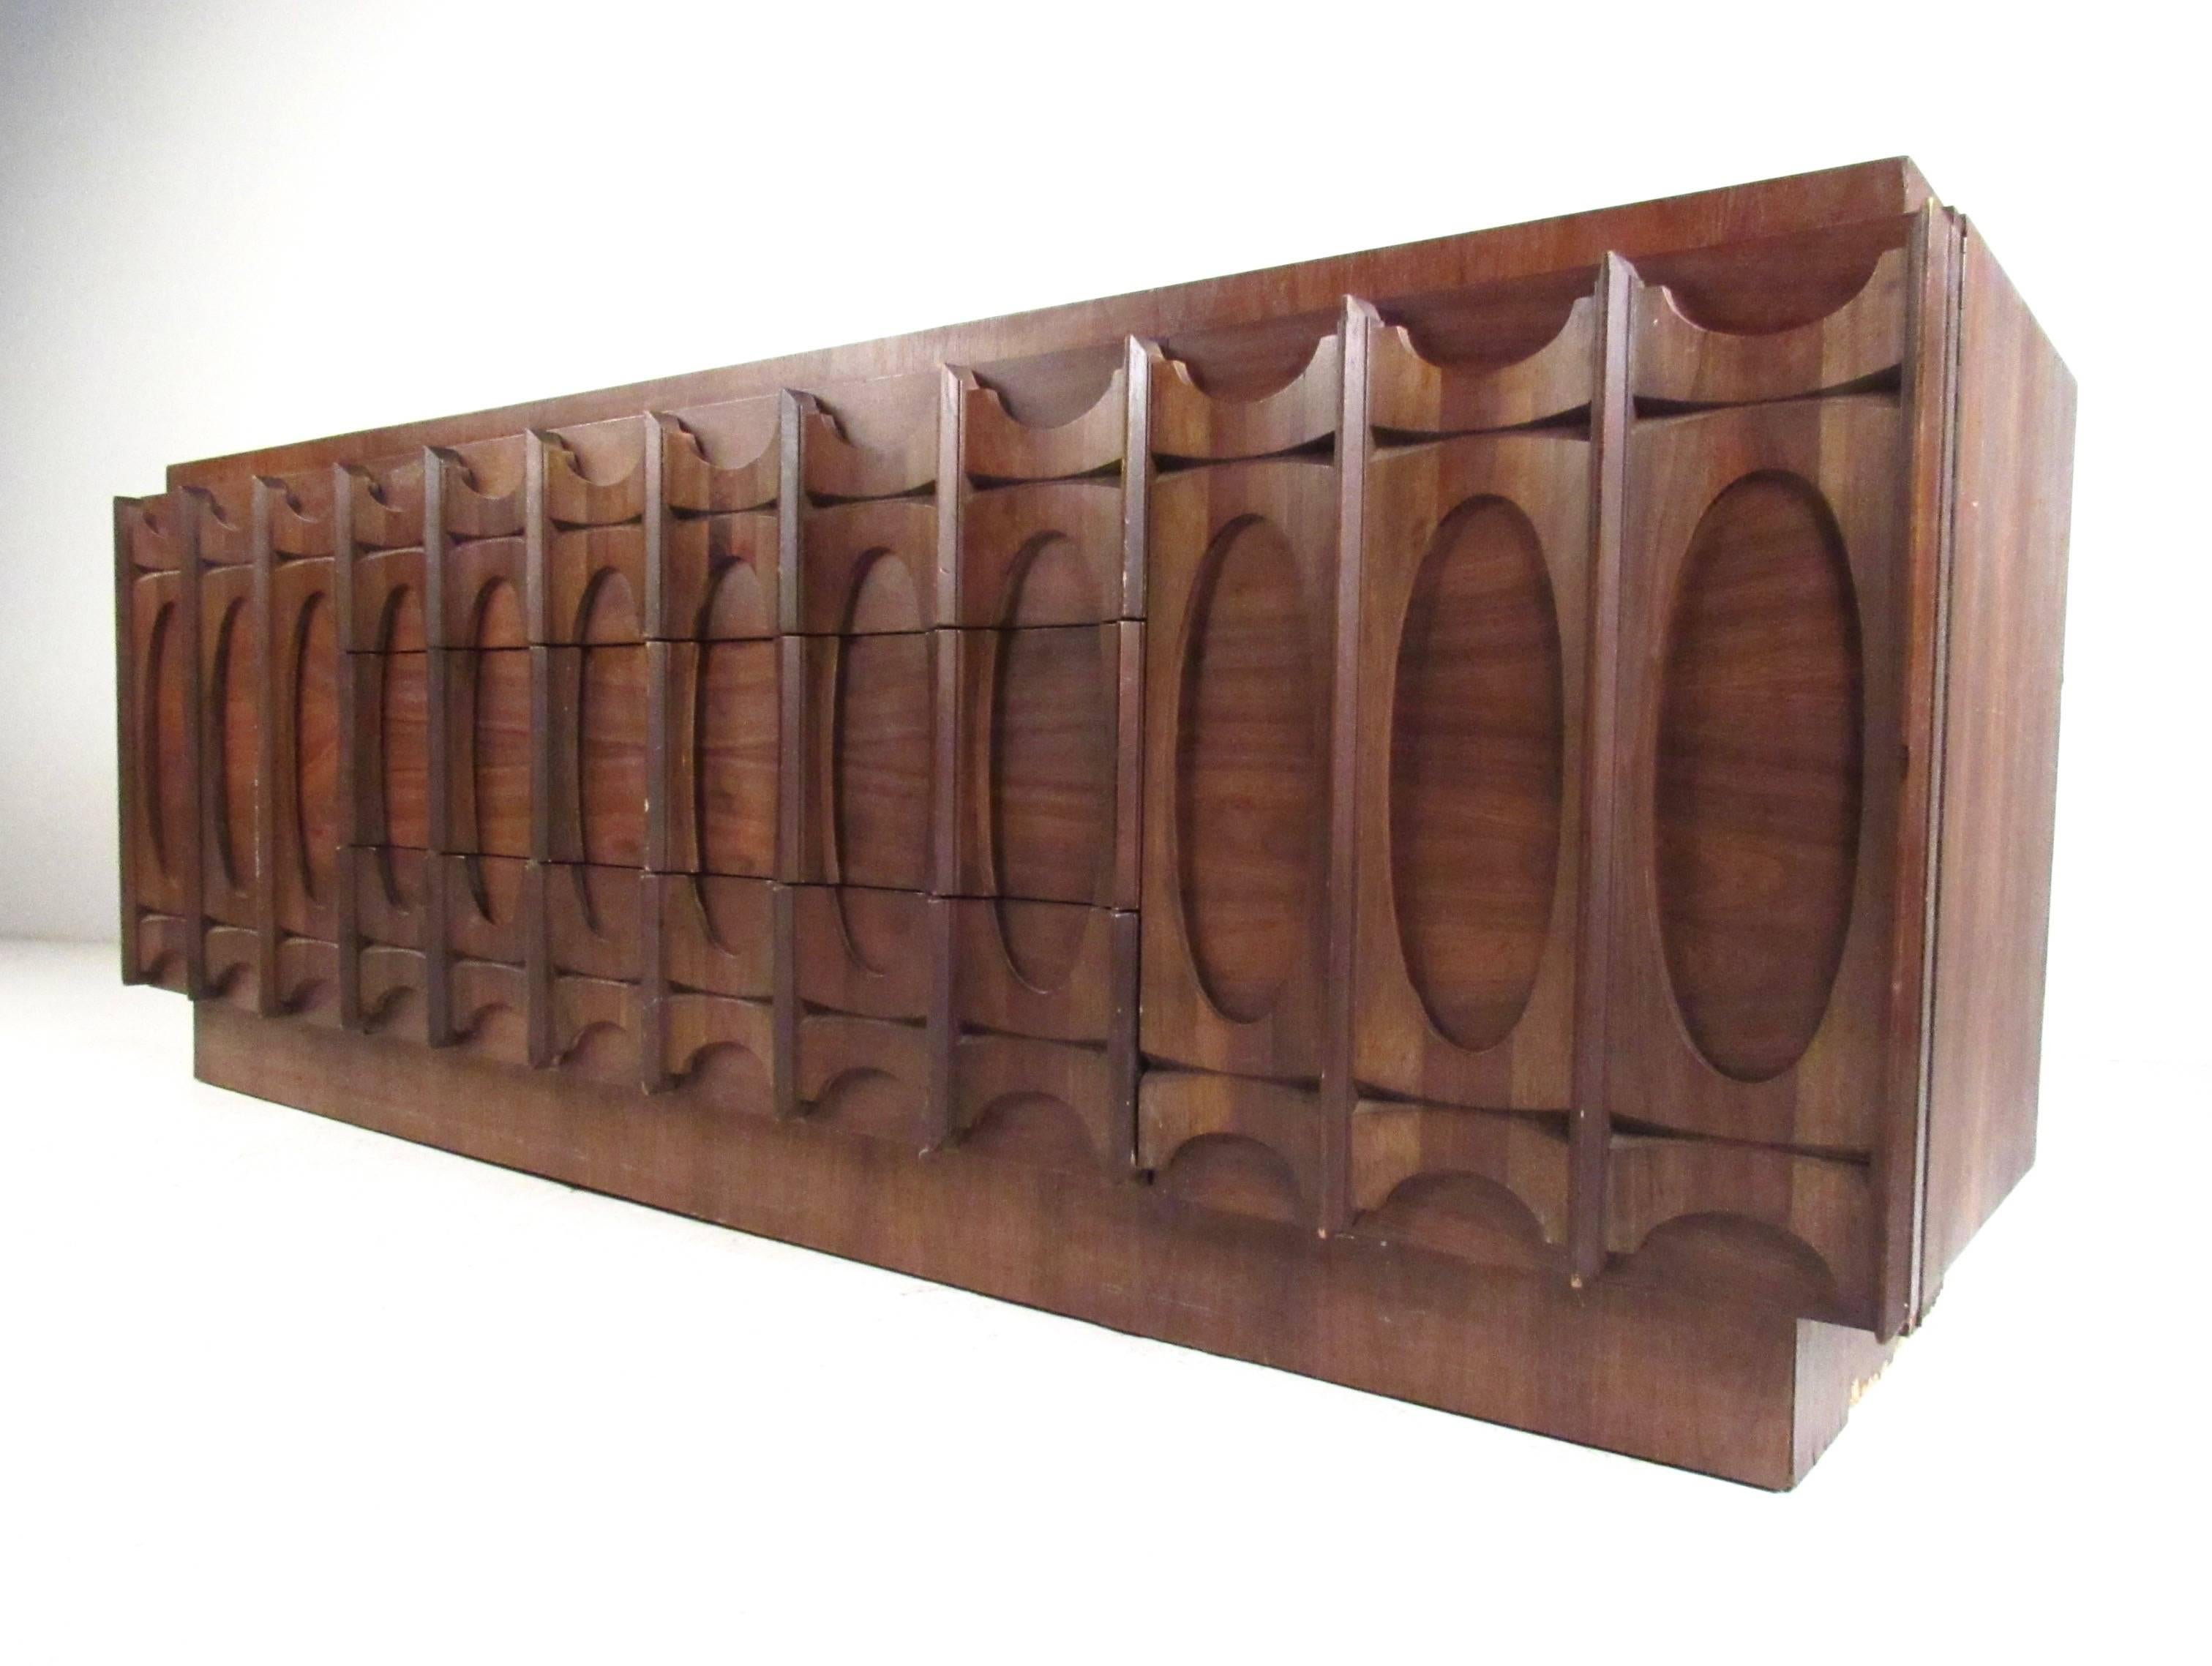 This sculptural walnut dresser features unique Brutalist design with plenty of storage for any bedroom setting. The unique cat eye Kent Coffey/Brasilia style trim on the piece is accentuated by the rich vintage finish. Please confirm item location